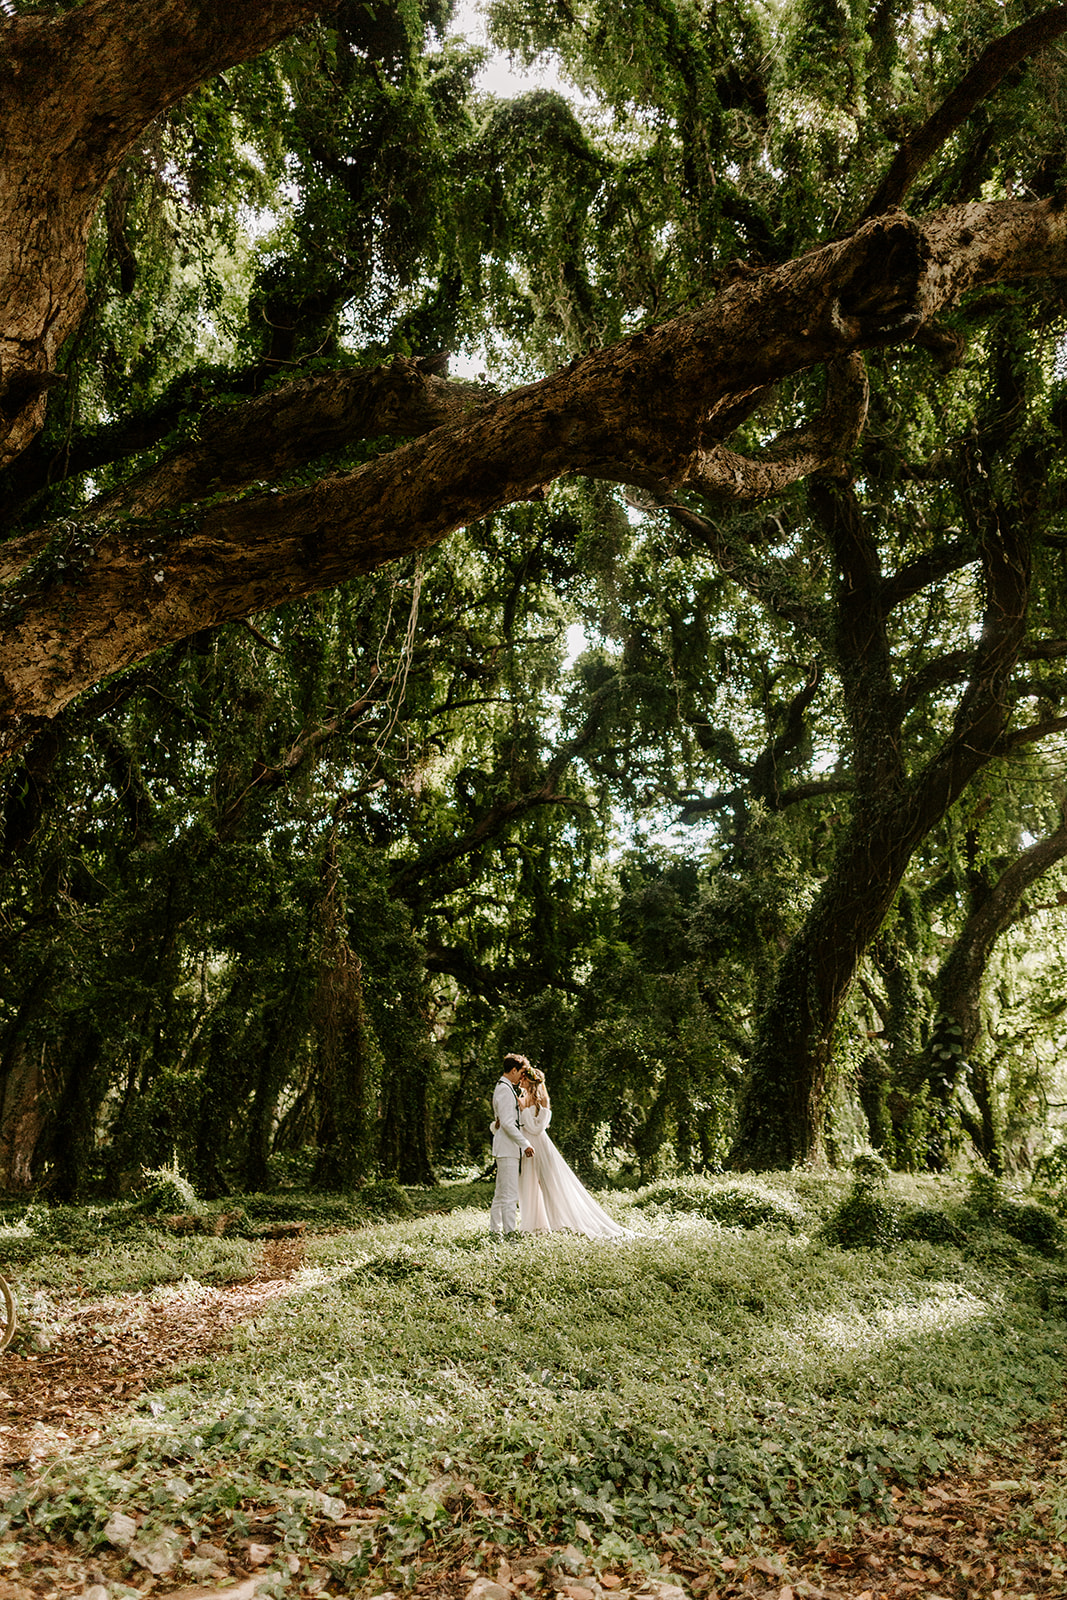 A couple who just got married celebrate their Maui elopement in a hawaii forest with lush greenery and jungle 